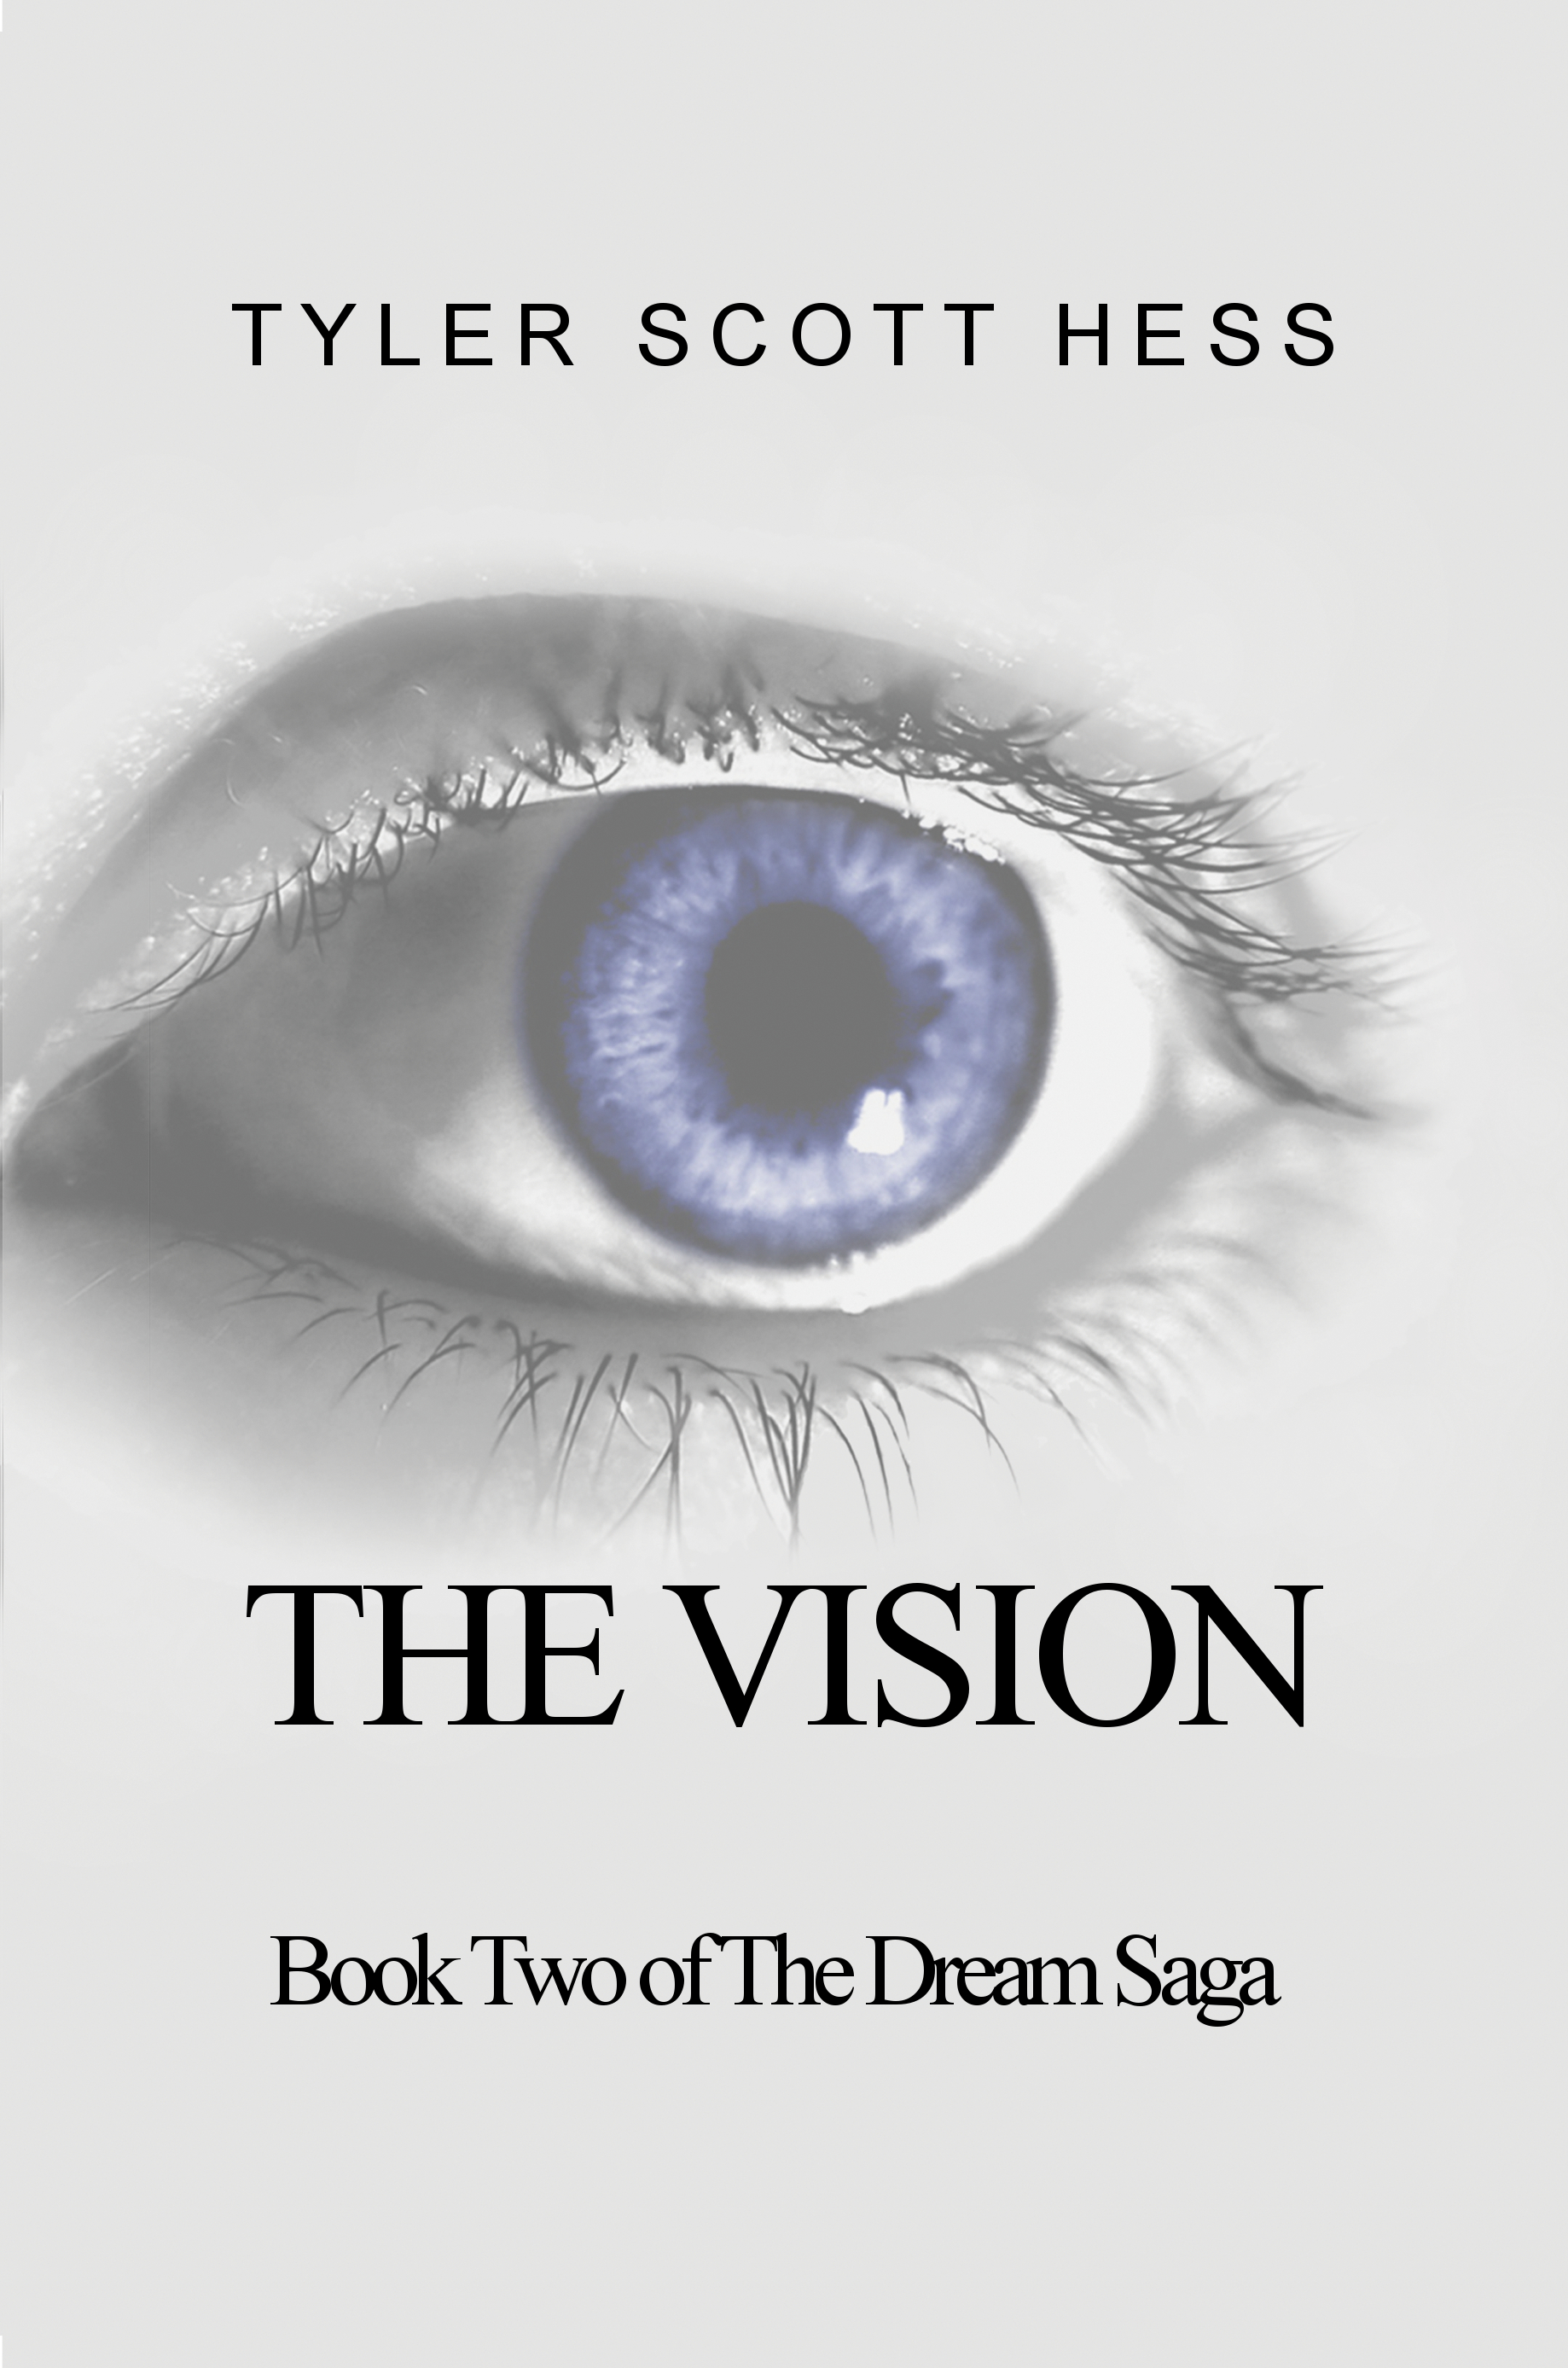 FREE: The Vision by Tyler Scott Hess